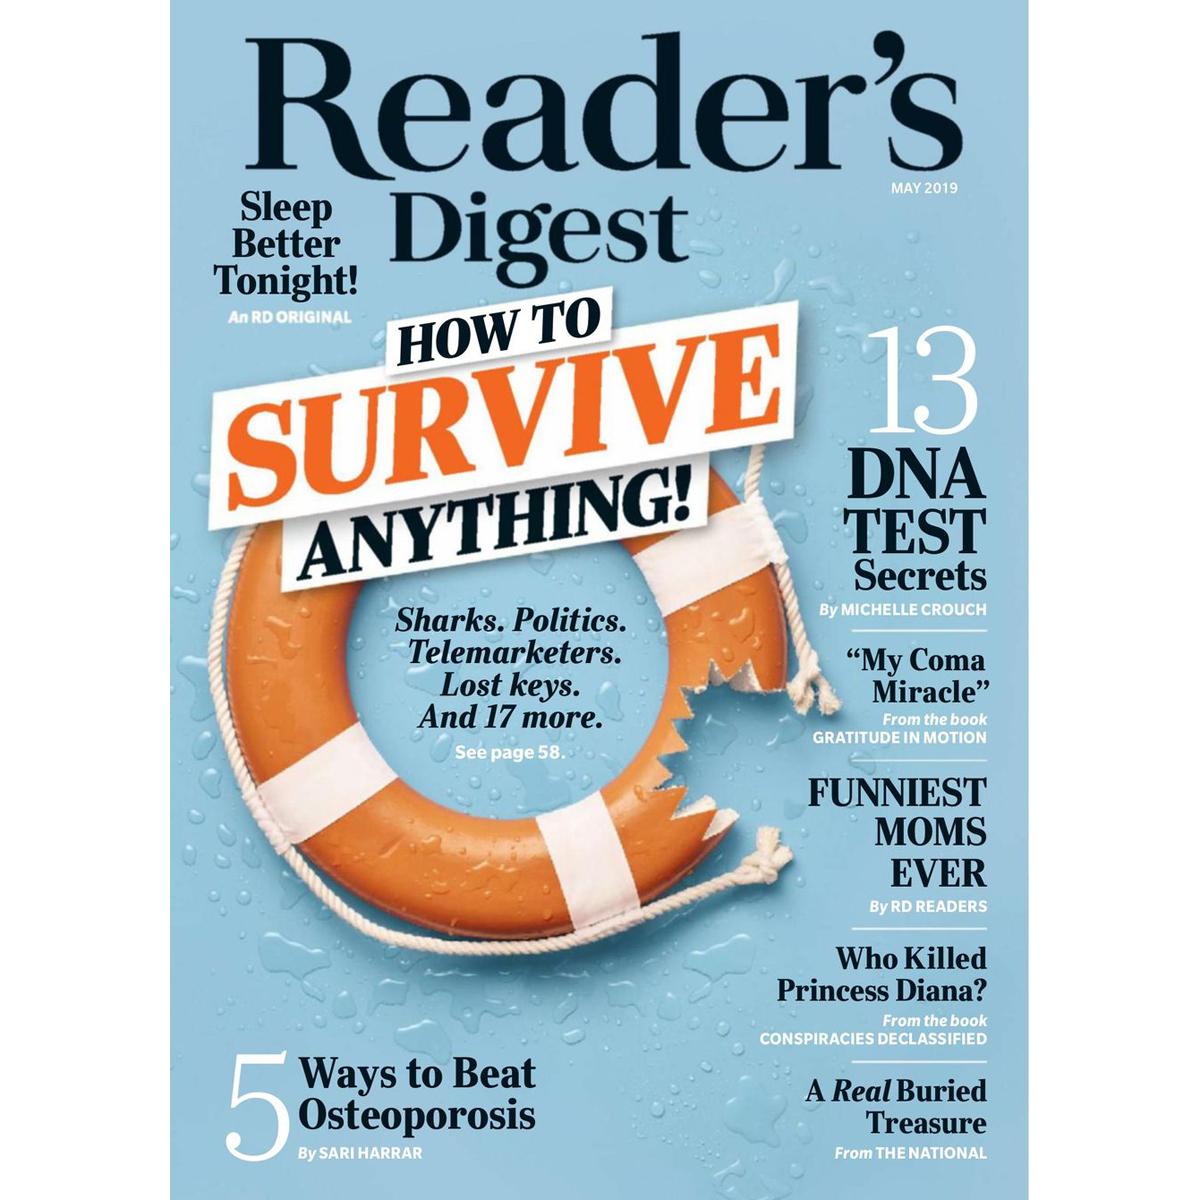 Readers Digest Magazine Subscription for $5.95